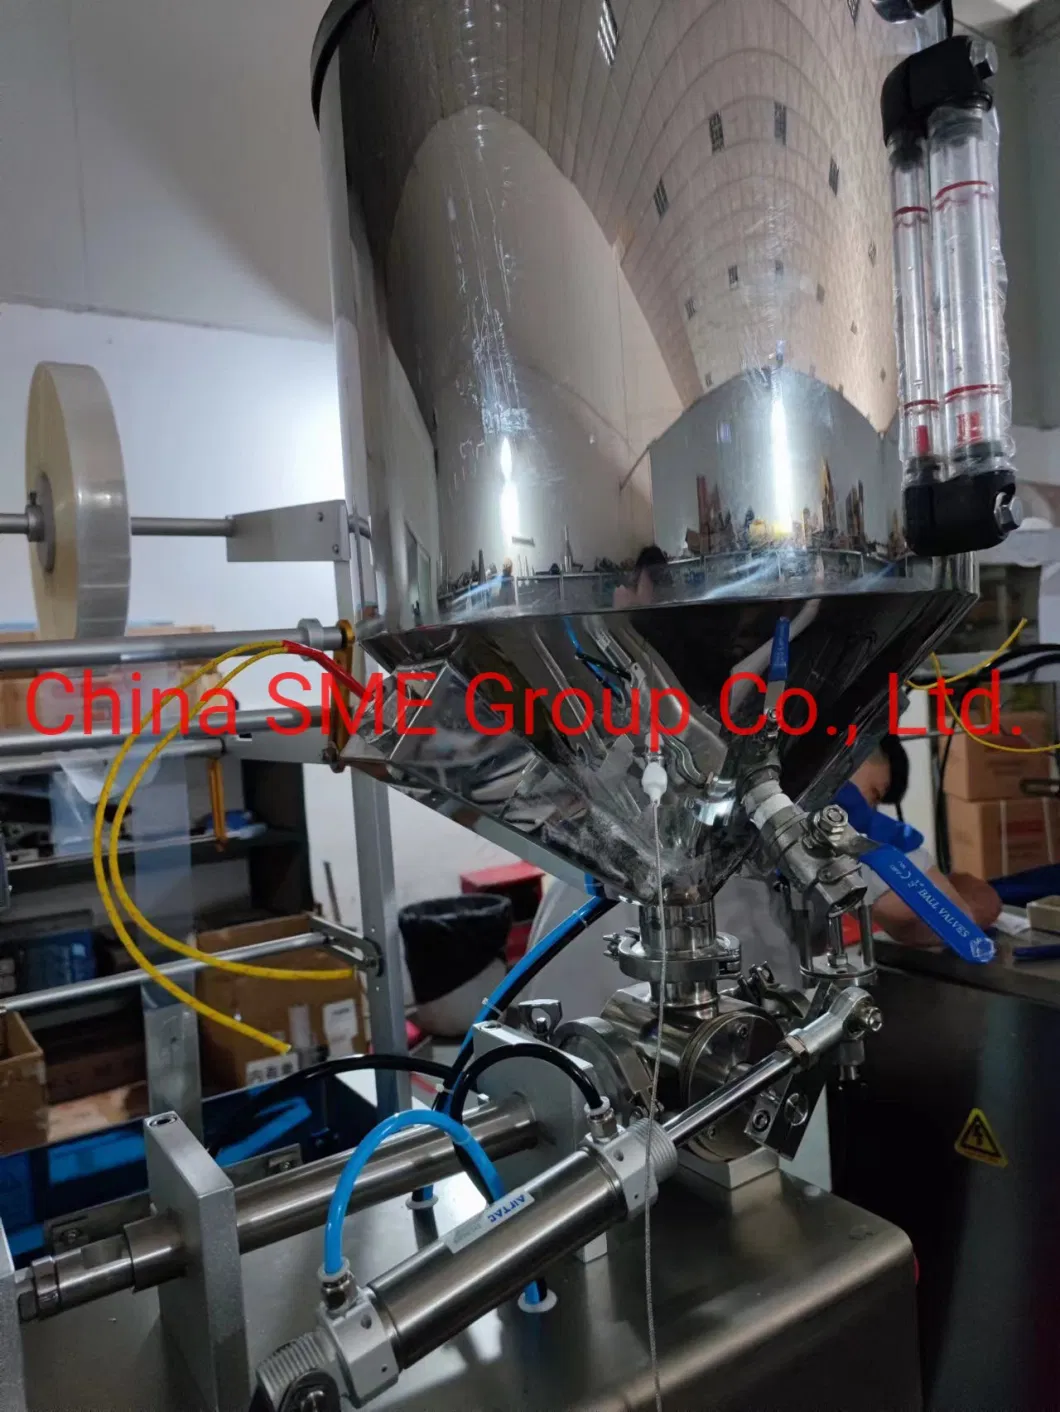 Pre-Made Pouch Automatic Packing Packaging Machine for Sealing Filling Doypack Zipper Bag of Coffee/Milk Flour/Powder/Masala/Sugar/Salt/Instant Noodle Seasoning